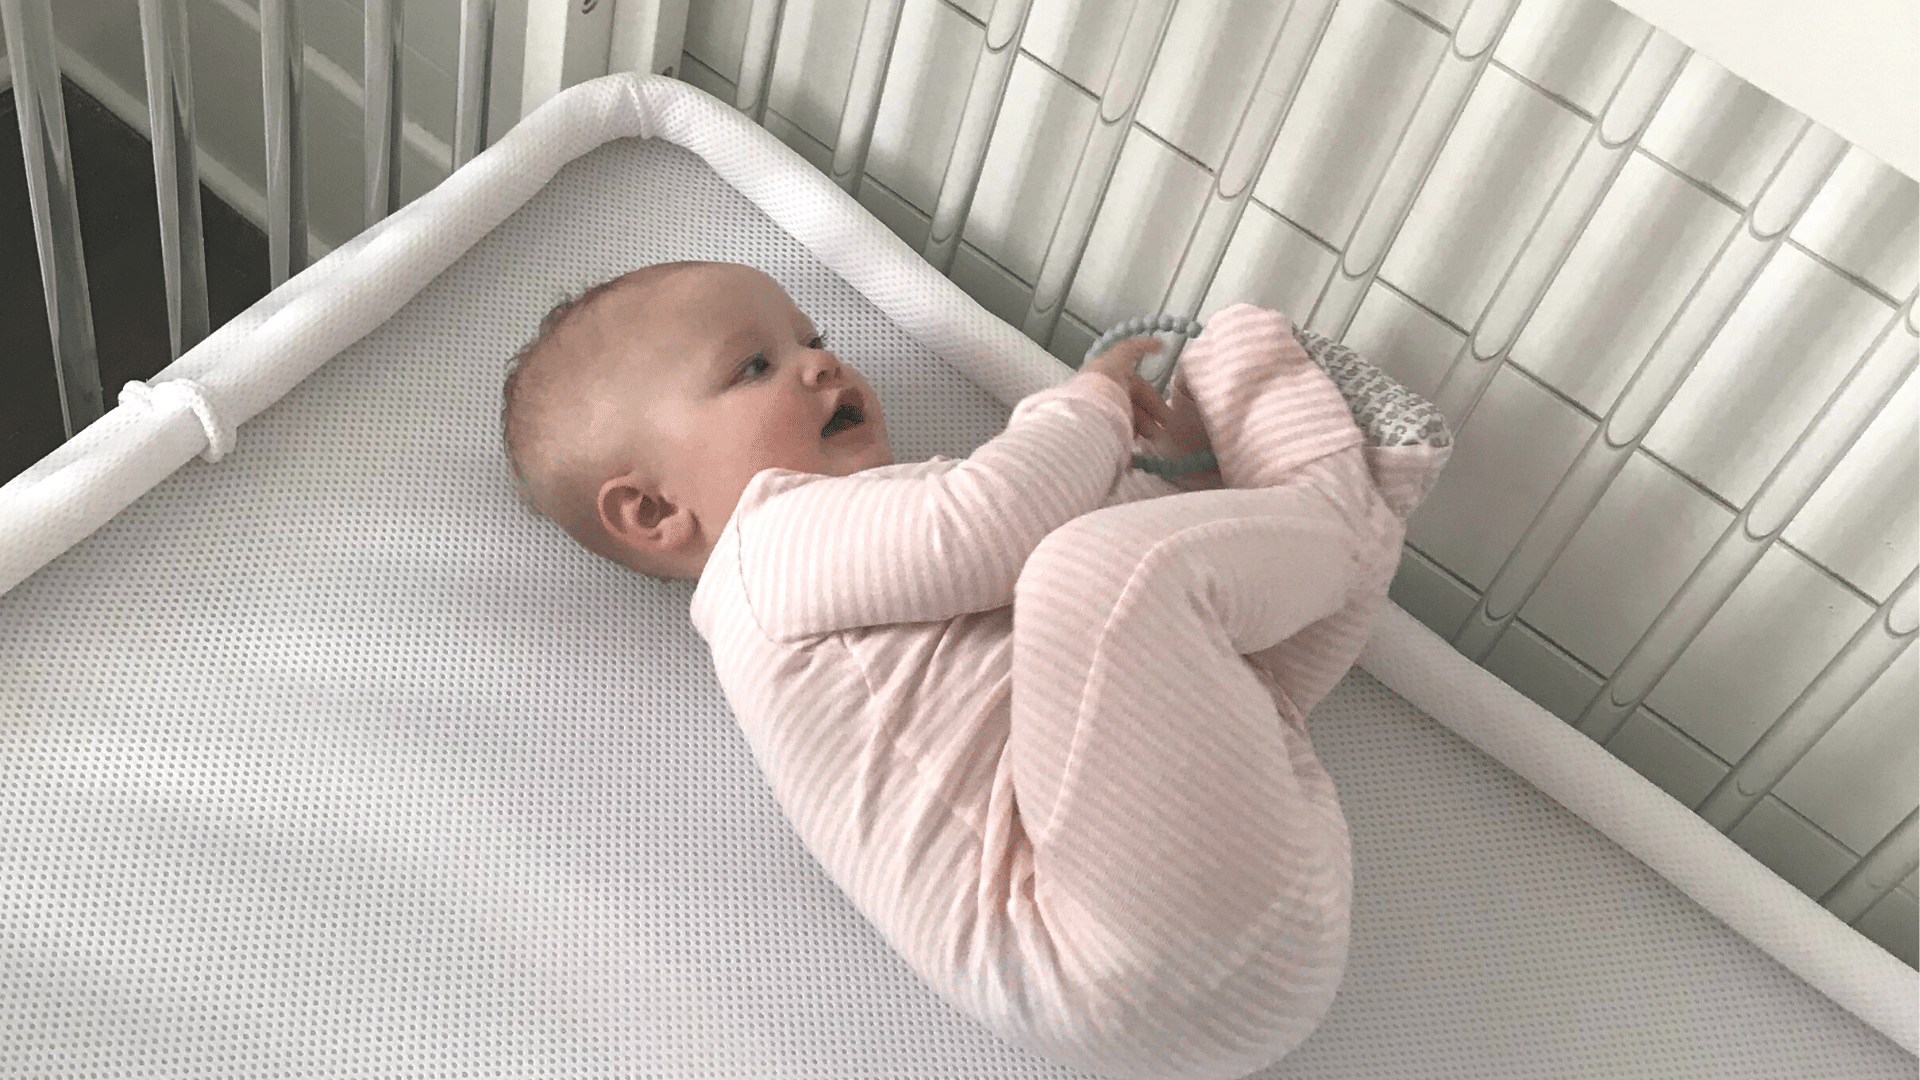 Baby Rolling Over - What You Need to Know to Keep Your Baby Safe